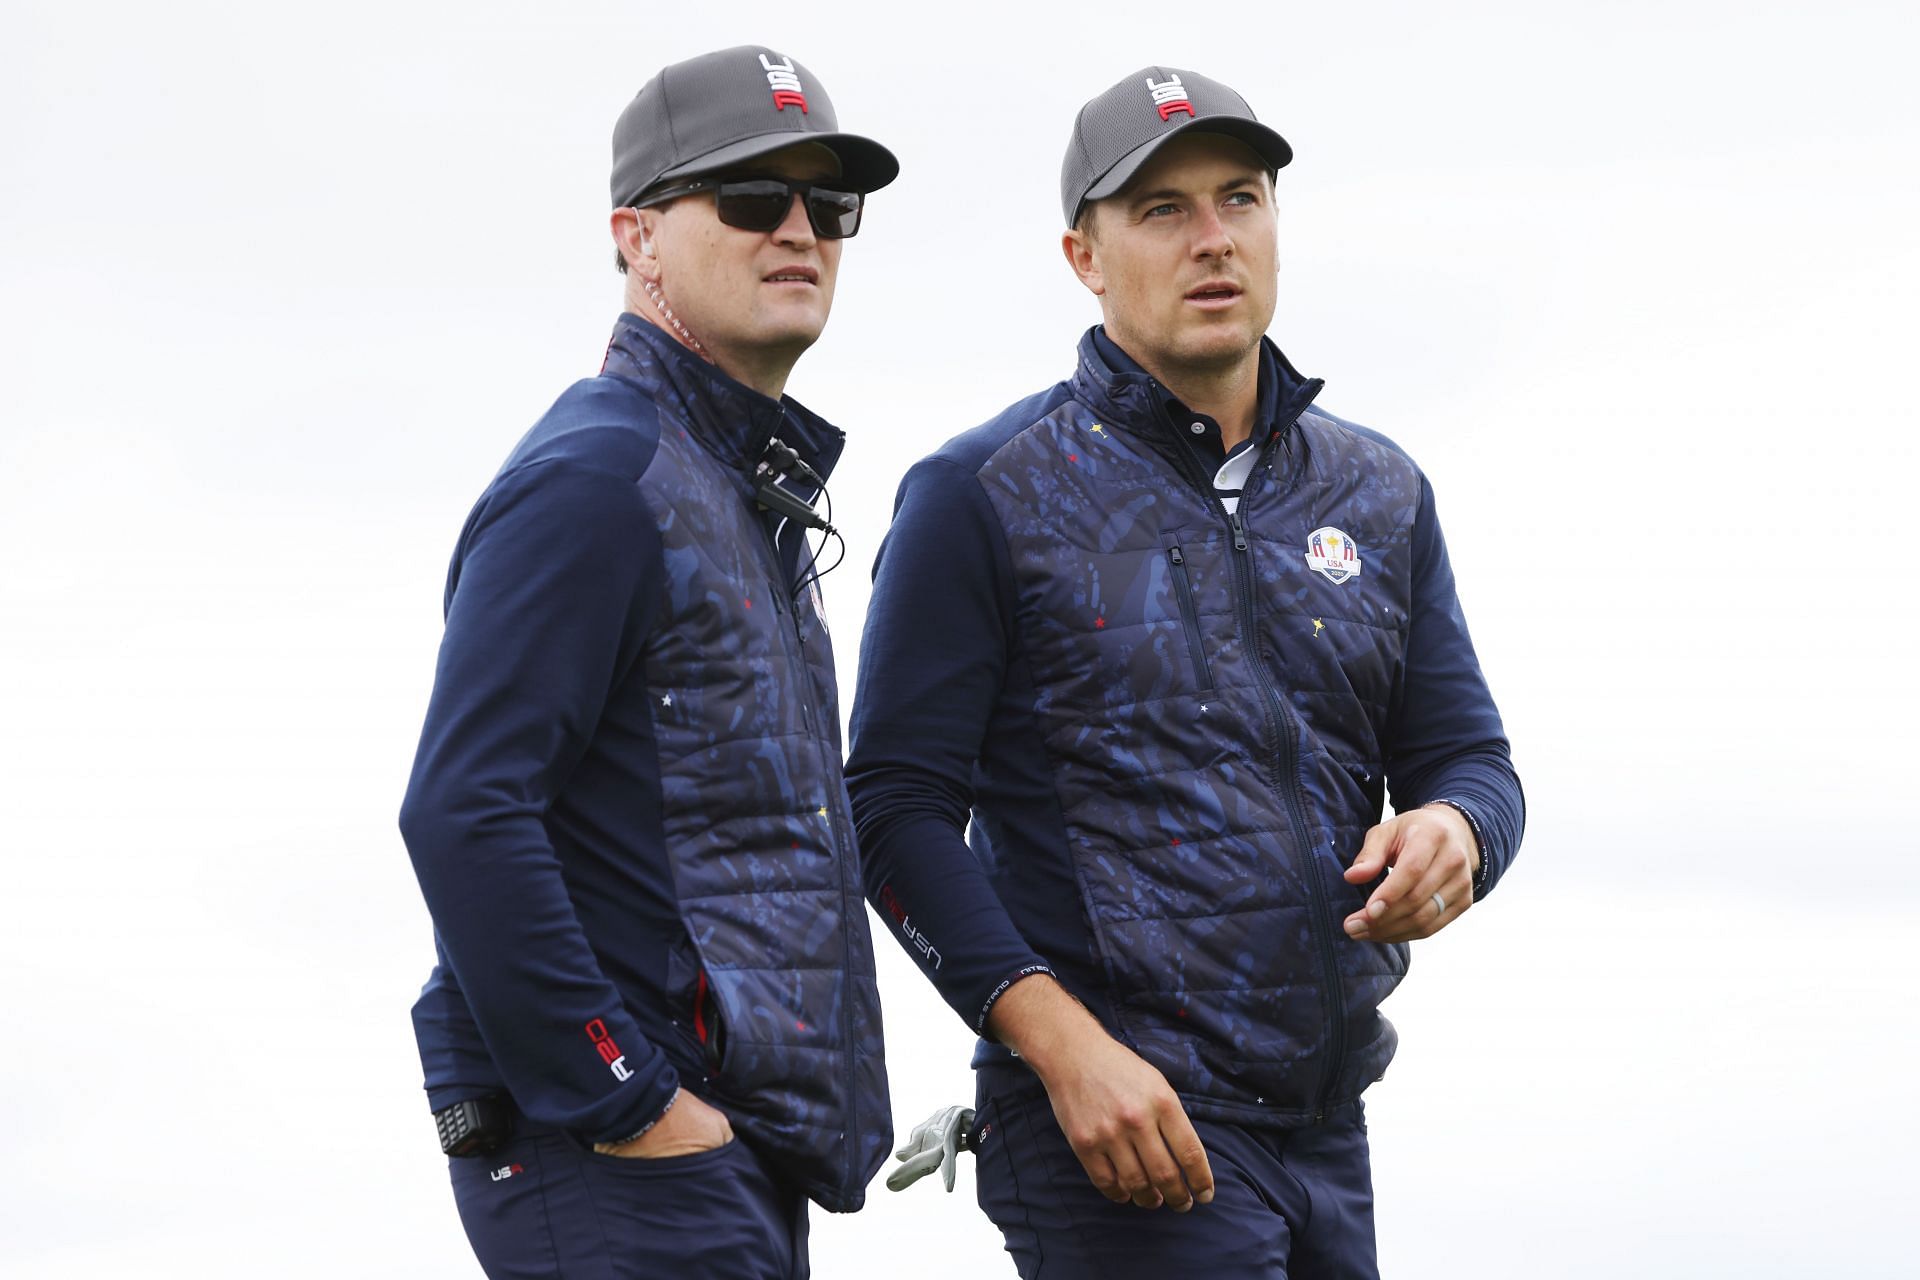 Jordan Spieth and Zach Johnson (Image via Stacy Revere/Getty Images)